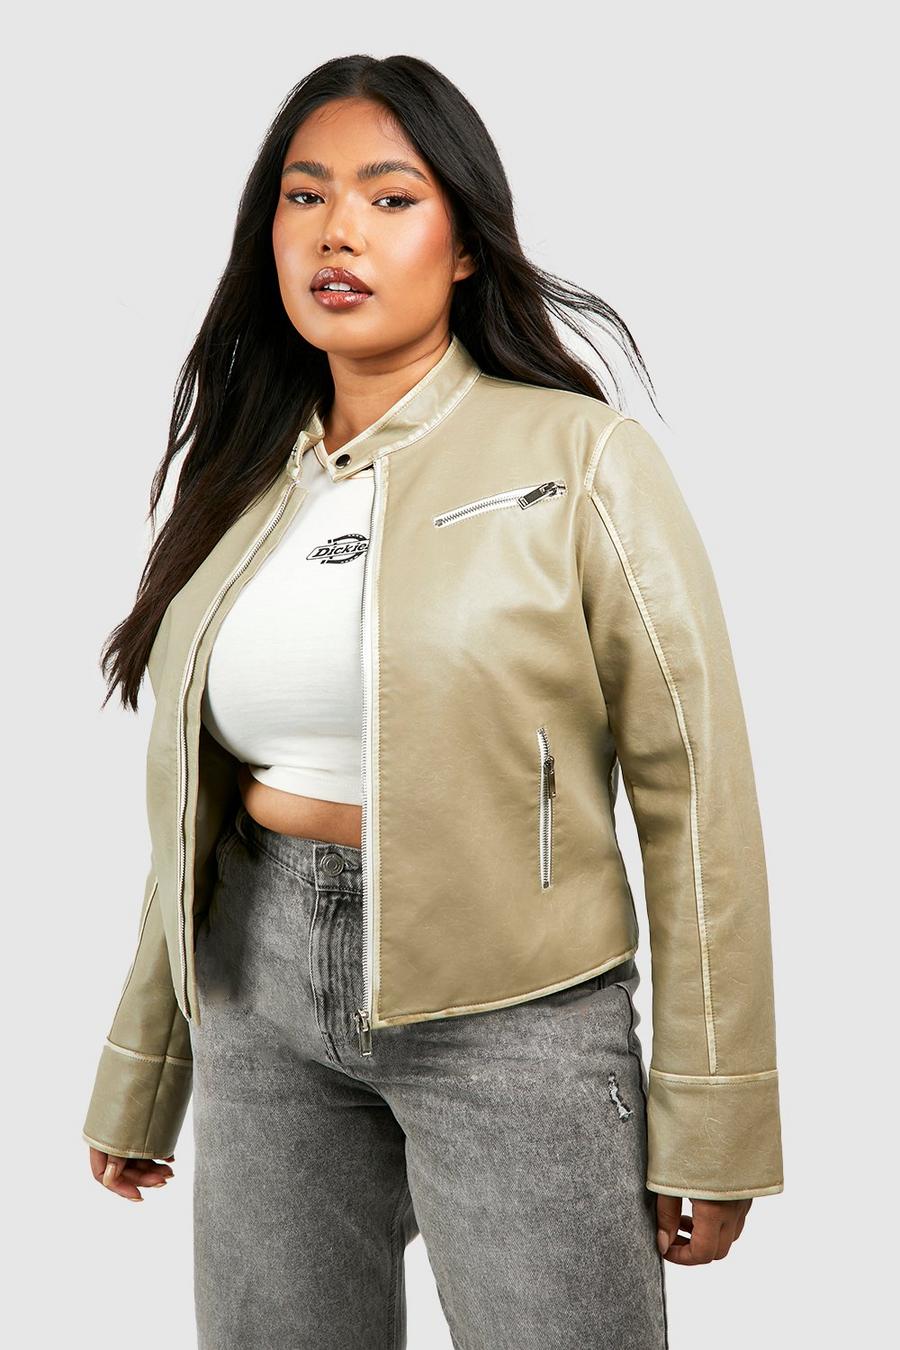 Women plus size coats • Compare & see prices now »